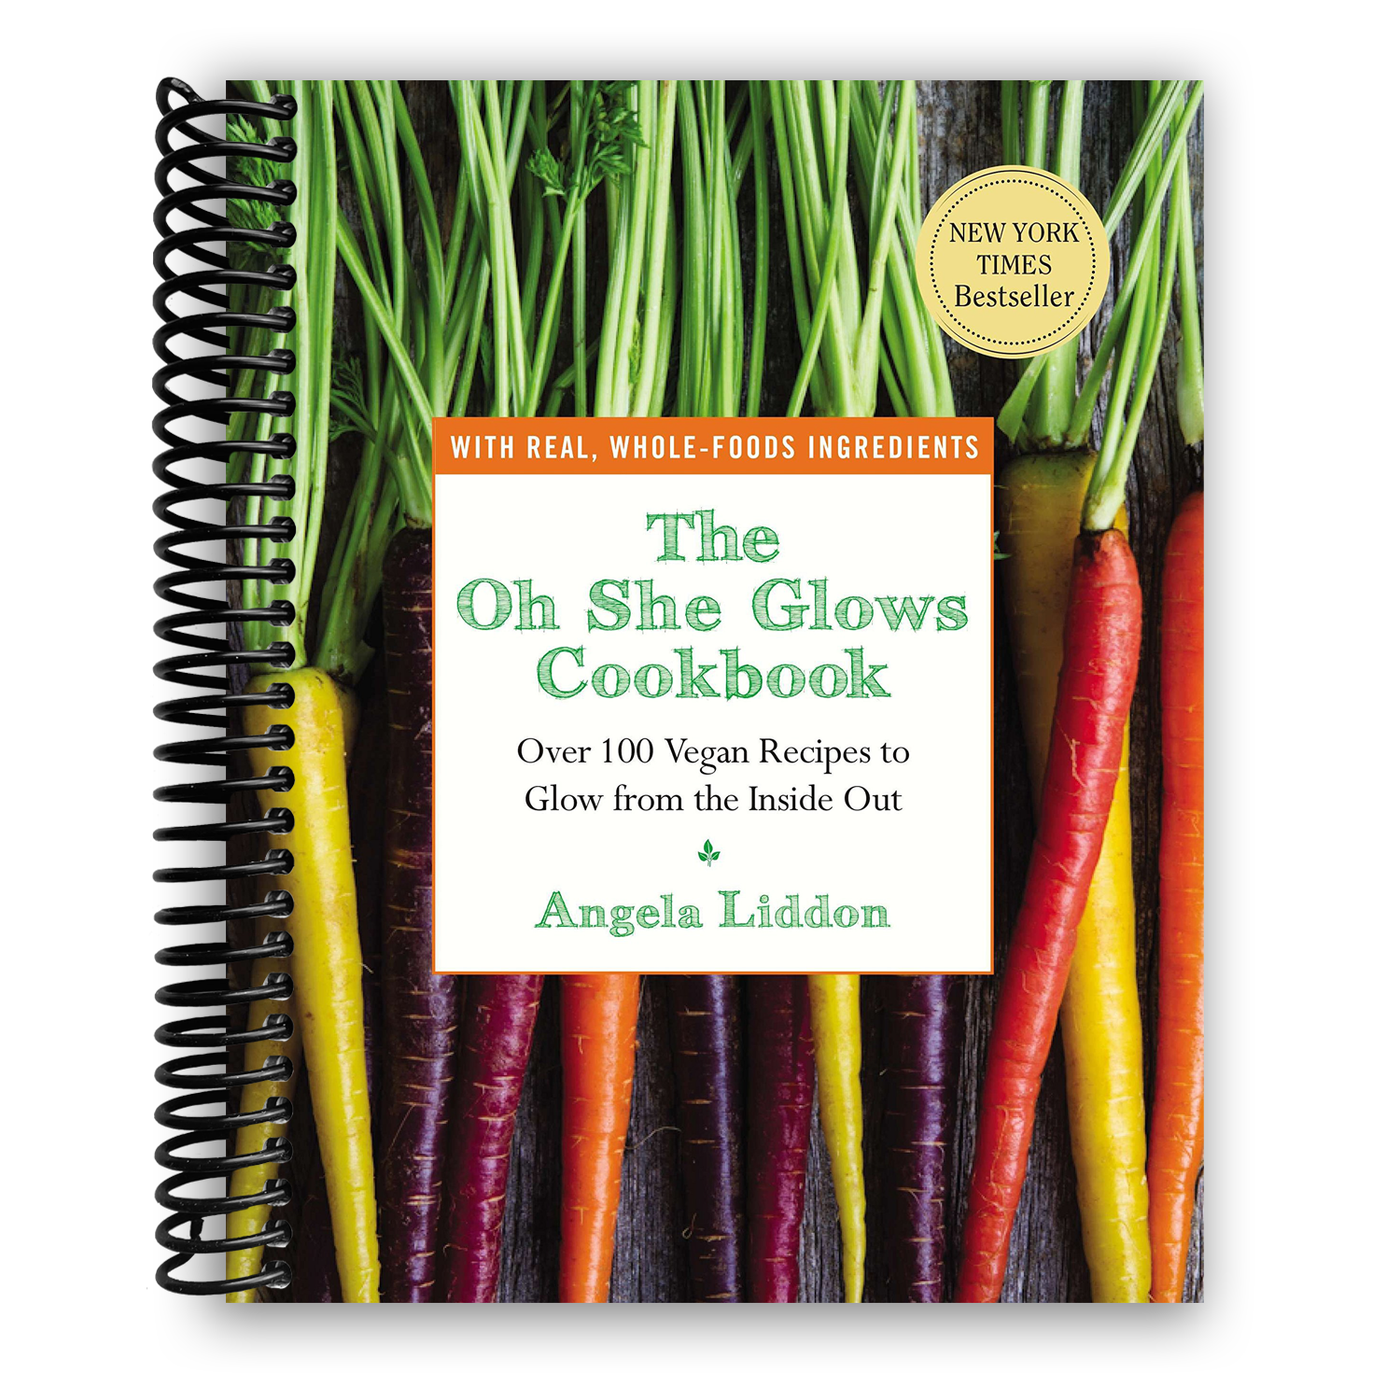 The Oh She Glows Cookbook: Over 100 Vegan Recipes to Glow from the Inside Out (Spiral Bound)